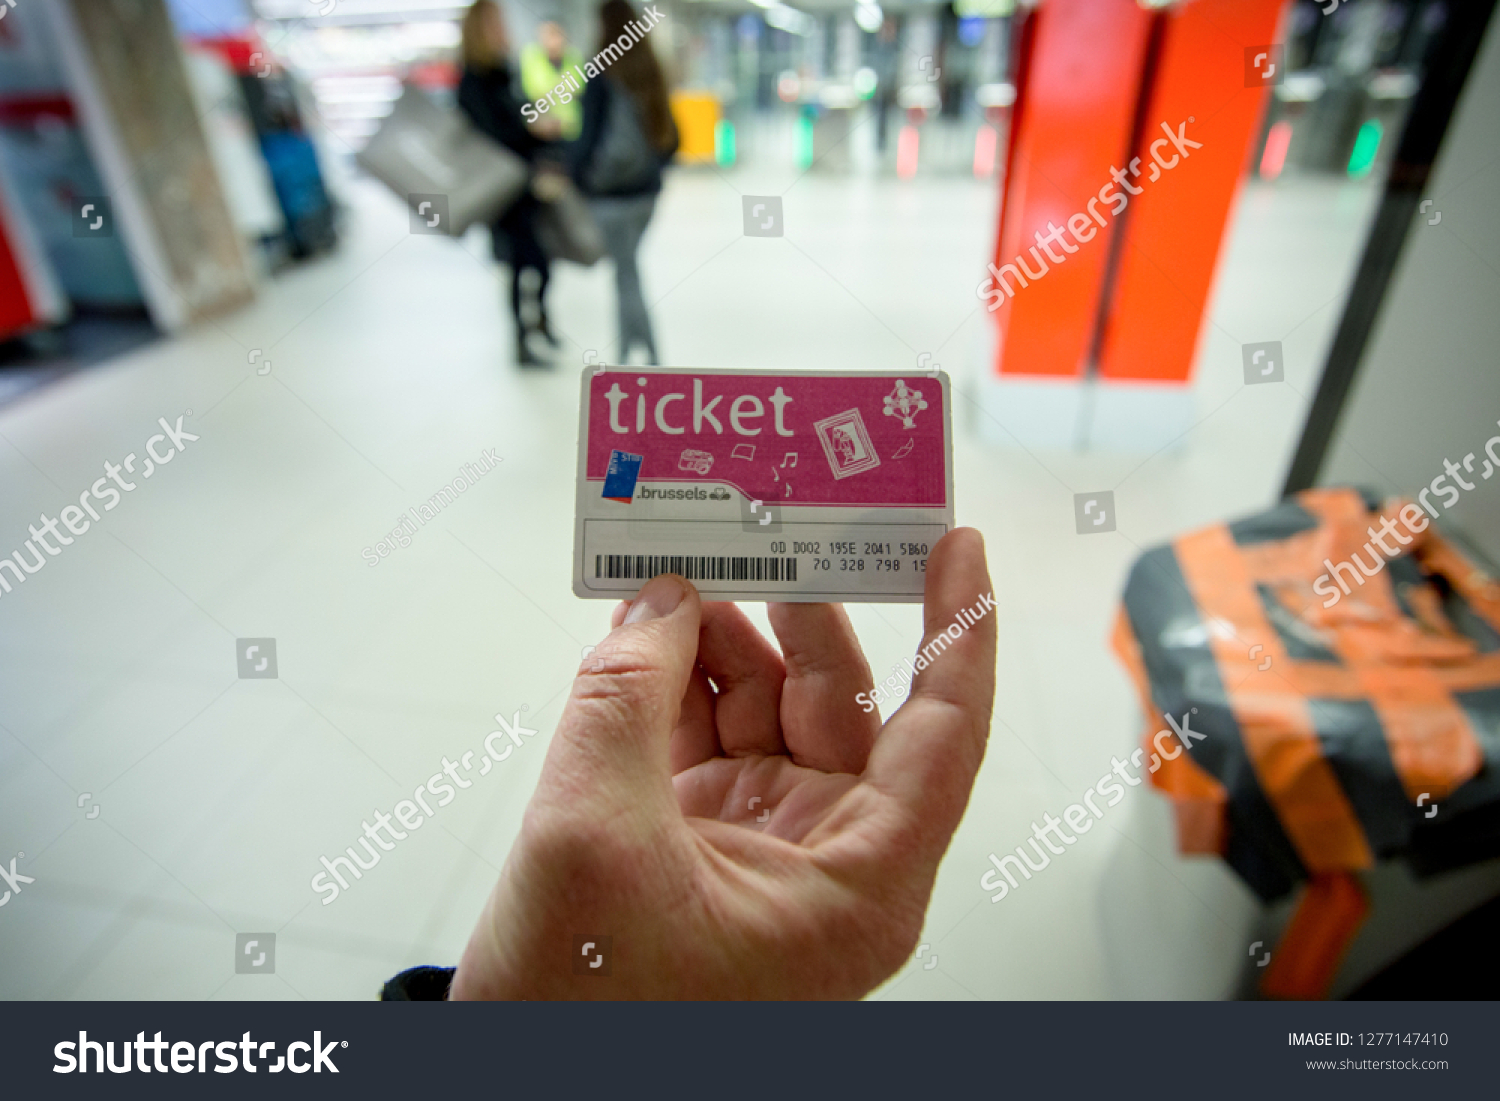 Brussles, Belgium - April 18, 2016 - Brussels day pass to subway, bus and other transport #1277147410